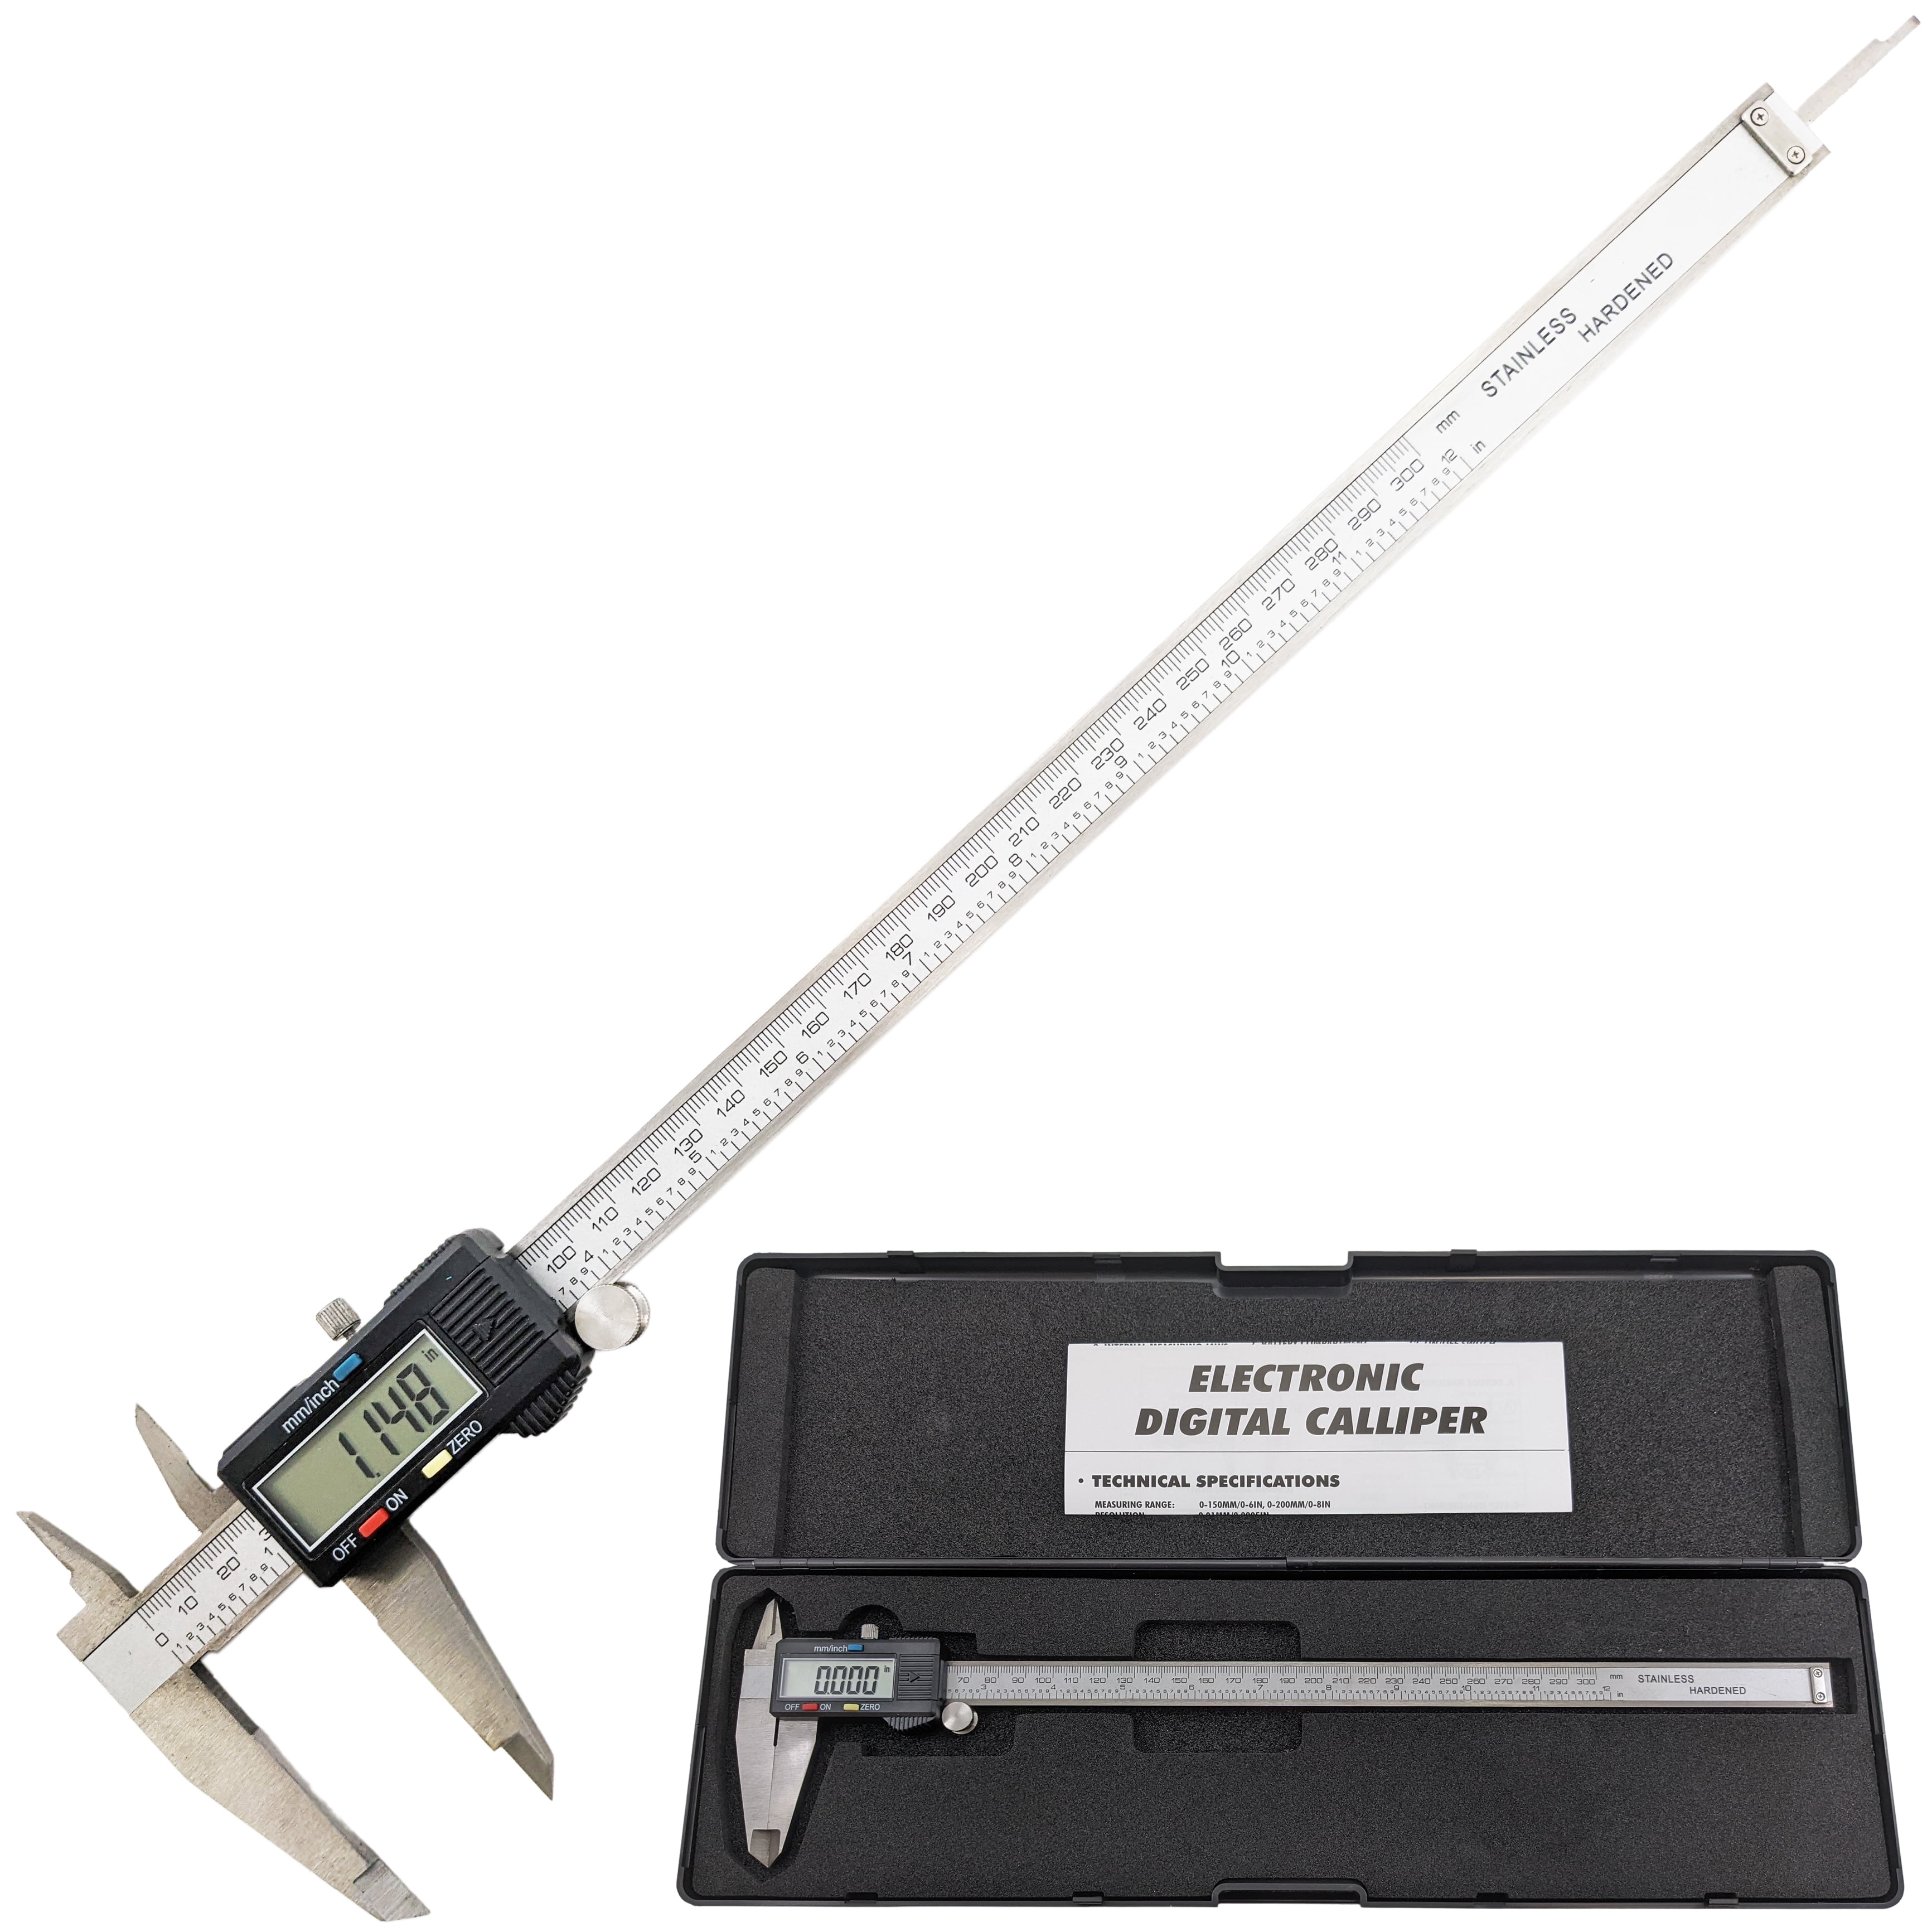 12-Inch Digital Caliper with LCD Display, Stainless Steel Scale, Electronic Vernier Gauge Micrometer with Carrying Case